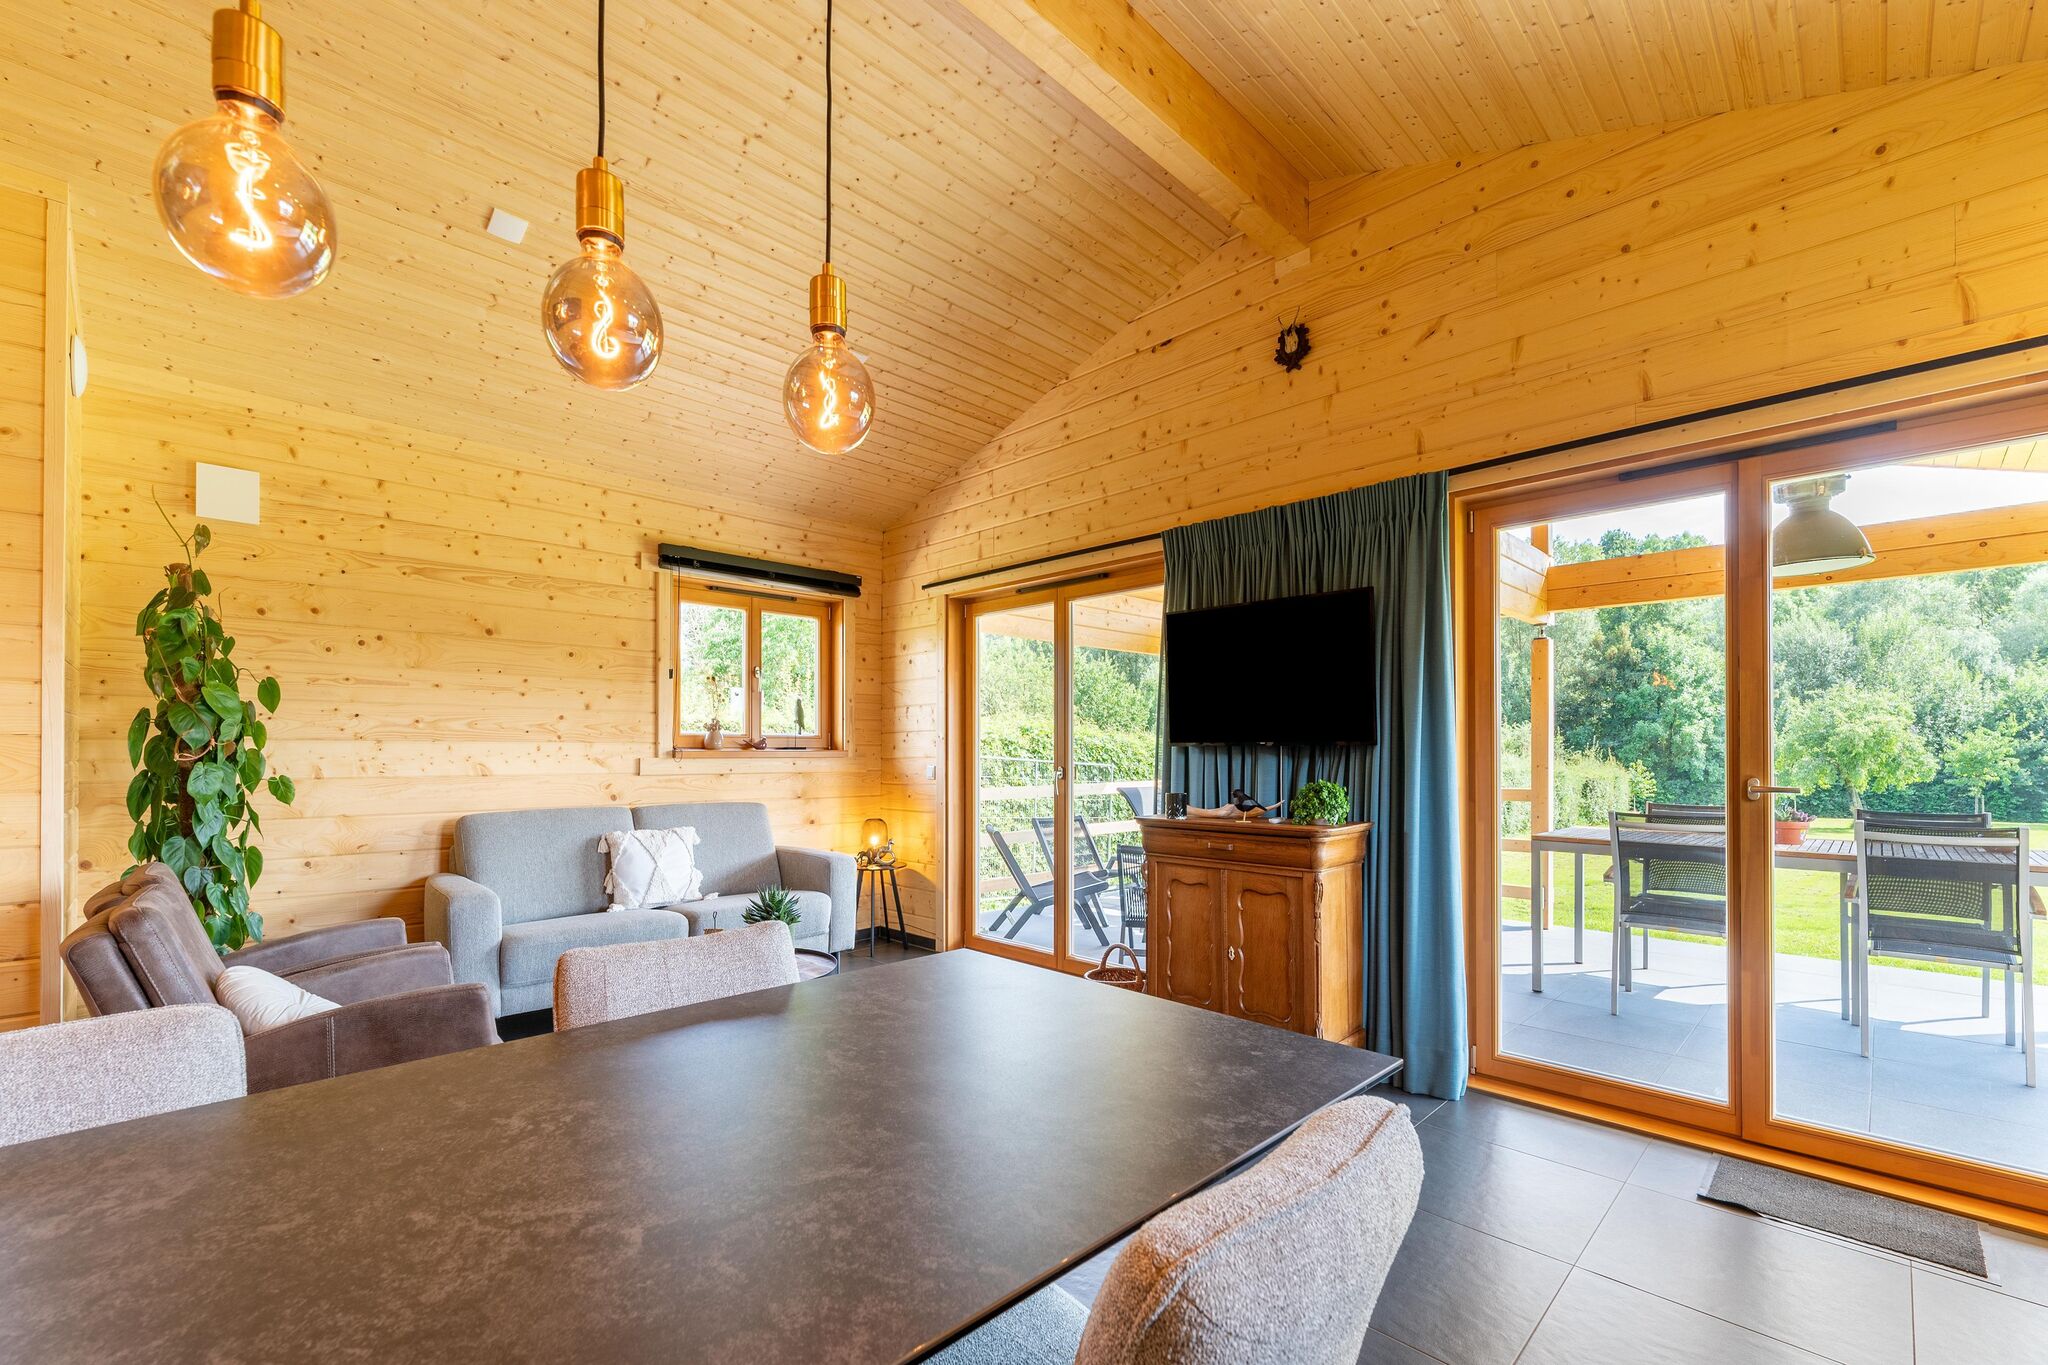 Cozy holiday home in Limburg with a beautiful view